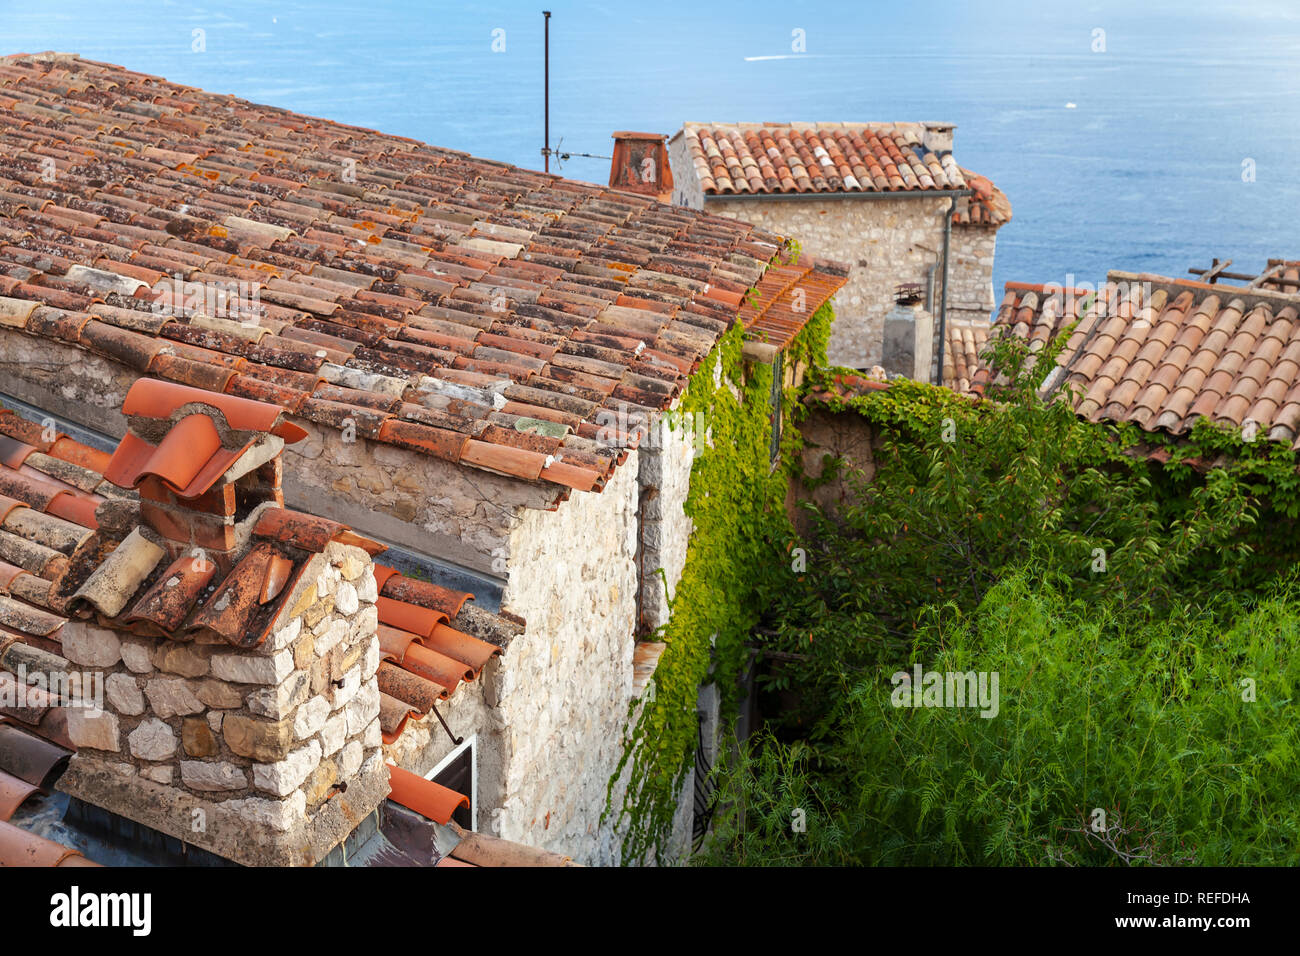 Eze village landscape with old red tile roofs. Alpes-Maritimes, France Stock Photo